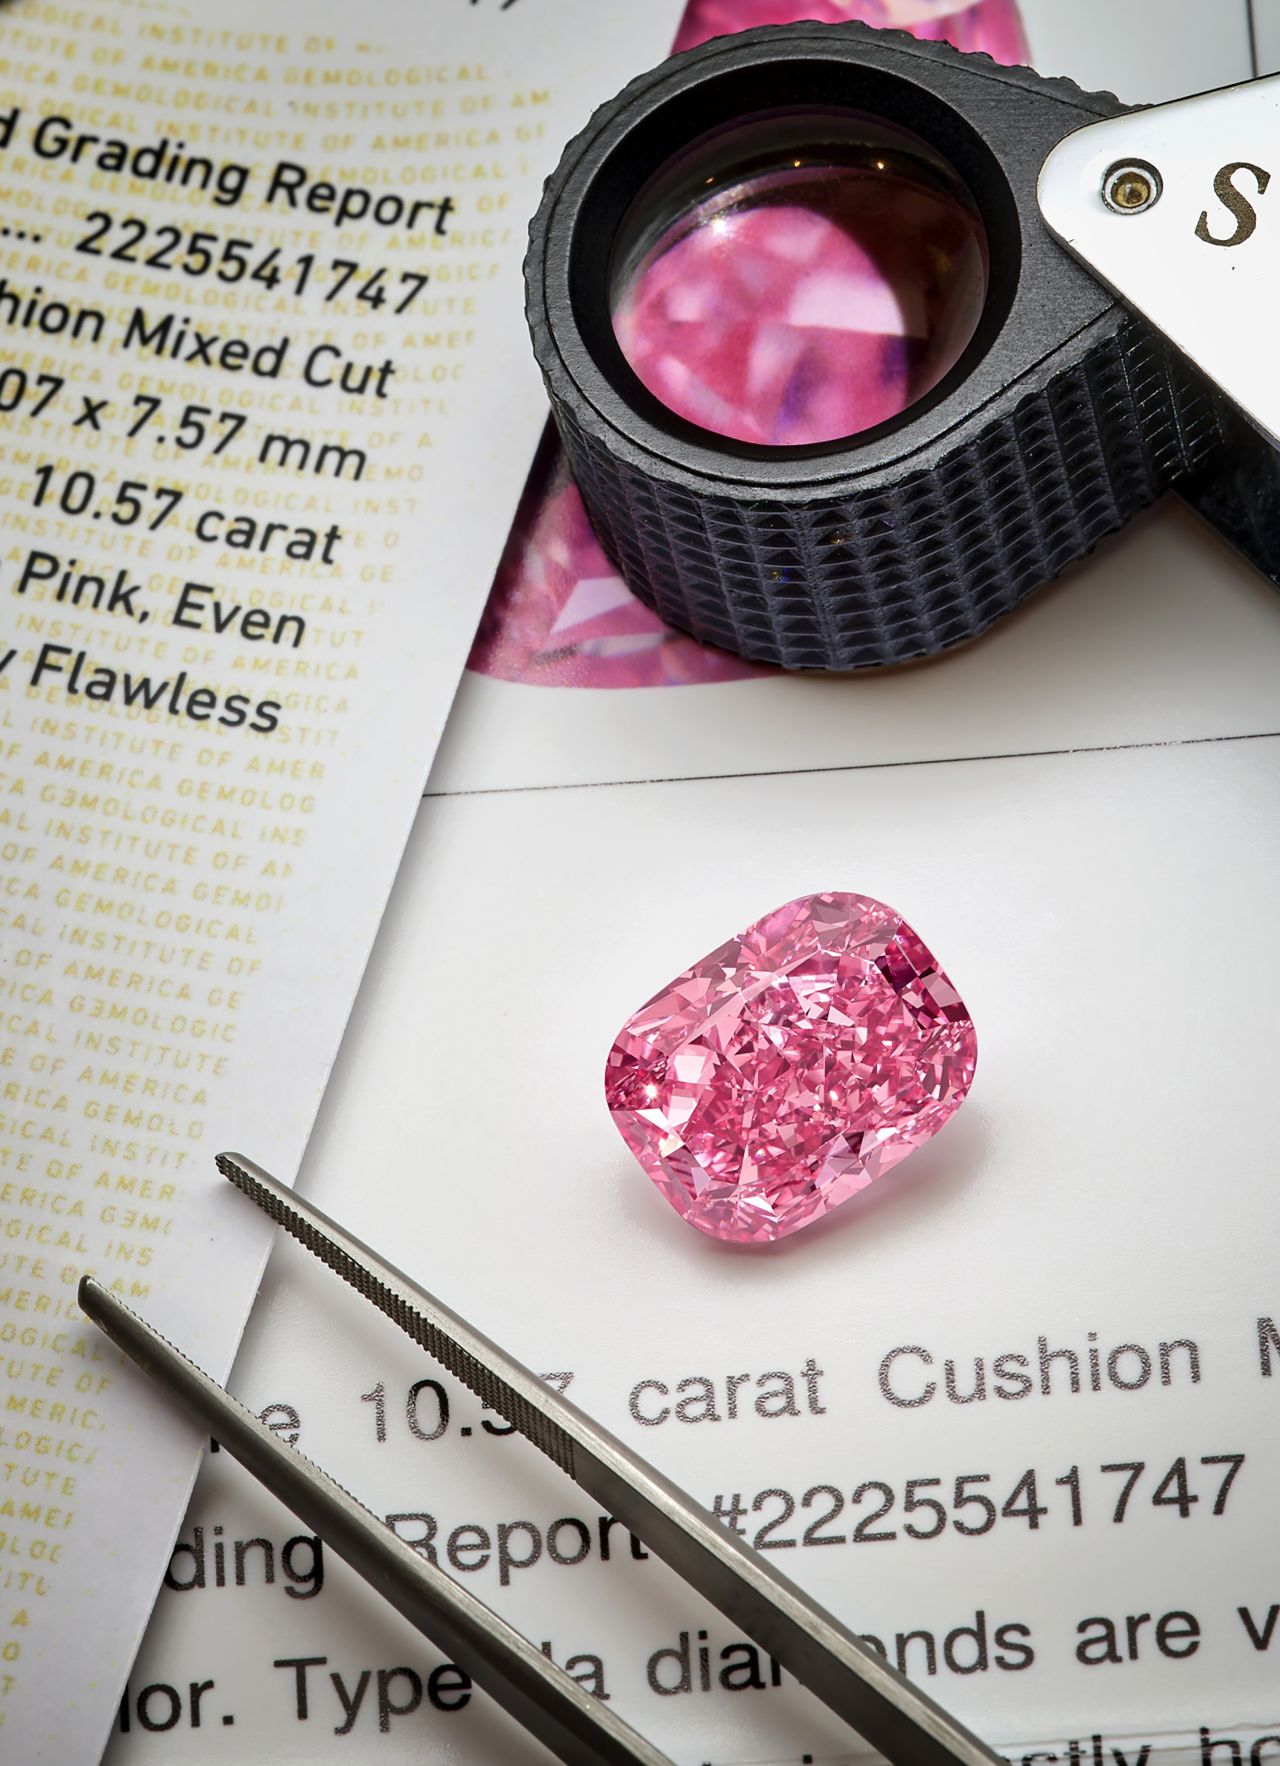 Weighing 10.57 carats and named The Eternal Pink, the "ultra-rare" gemstone will go under the hammer this June.